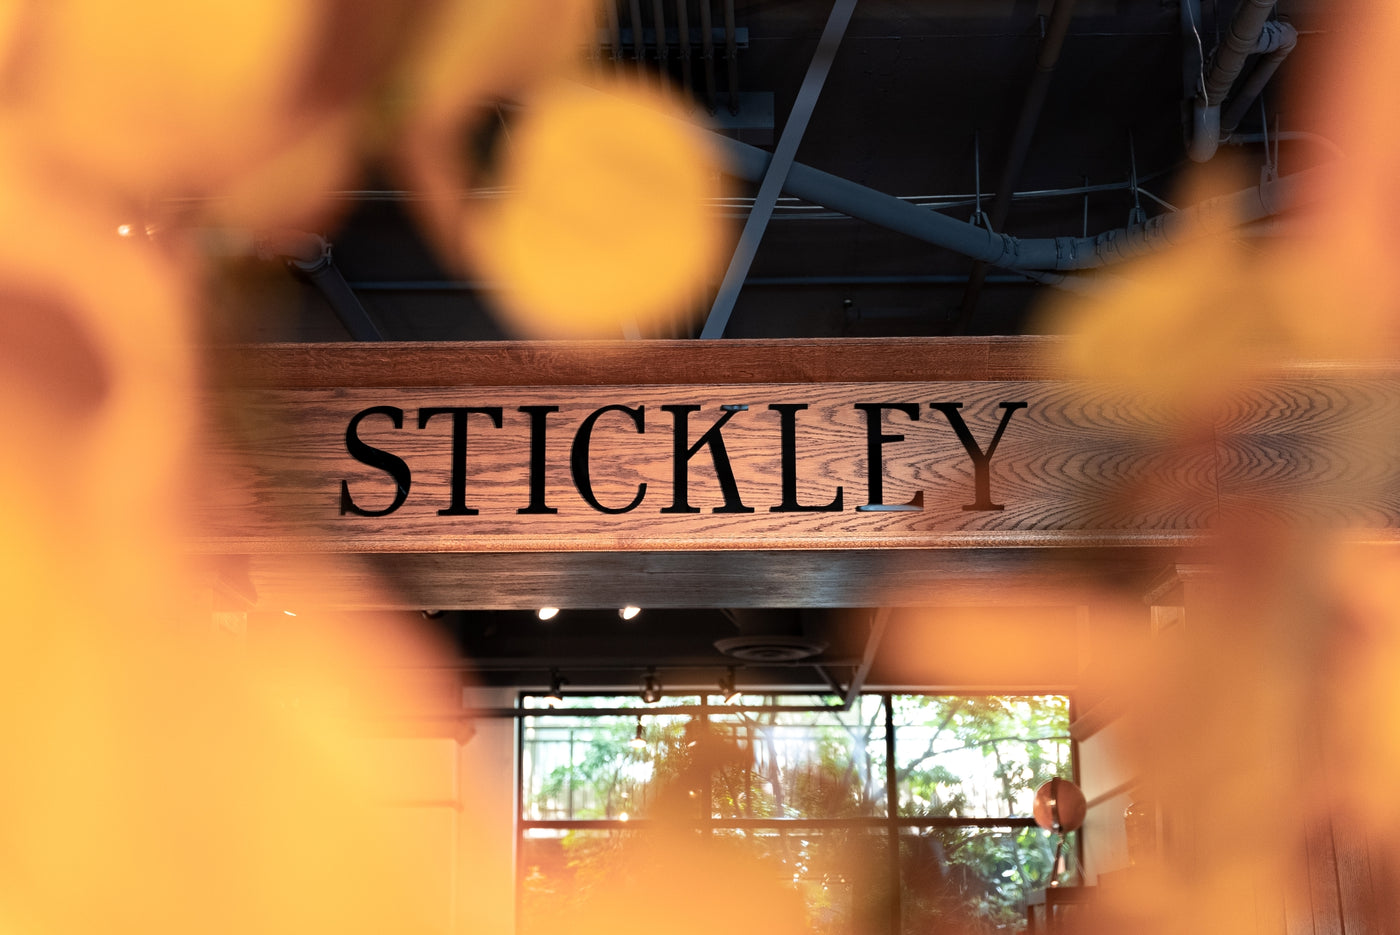 View of the Stickley brand sign through fake flowers in the Seldens furniture showroom in Bellevue, Washington.